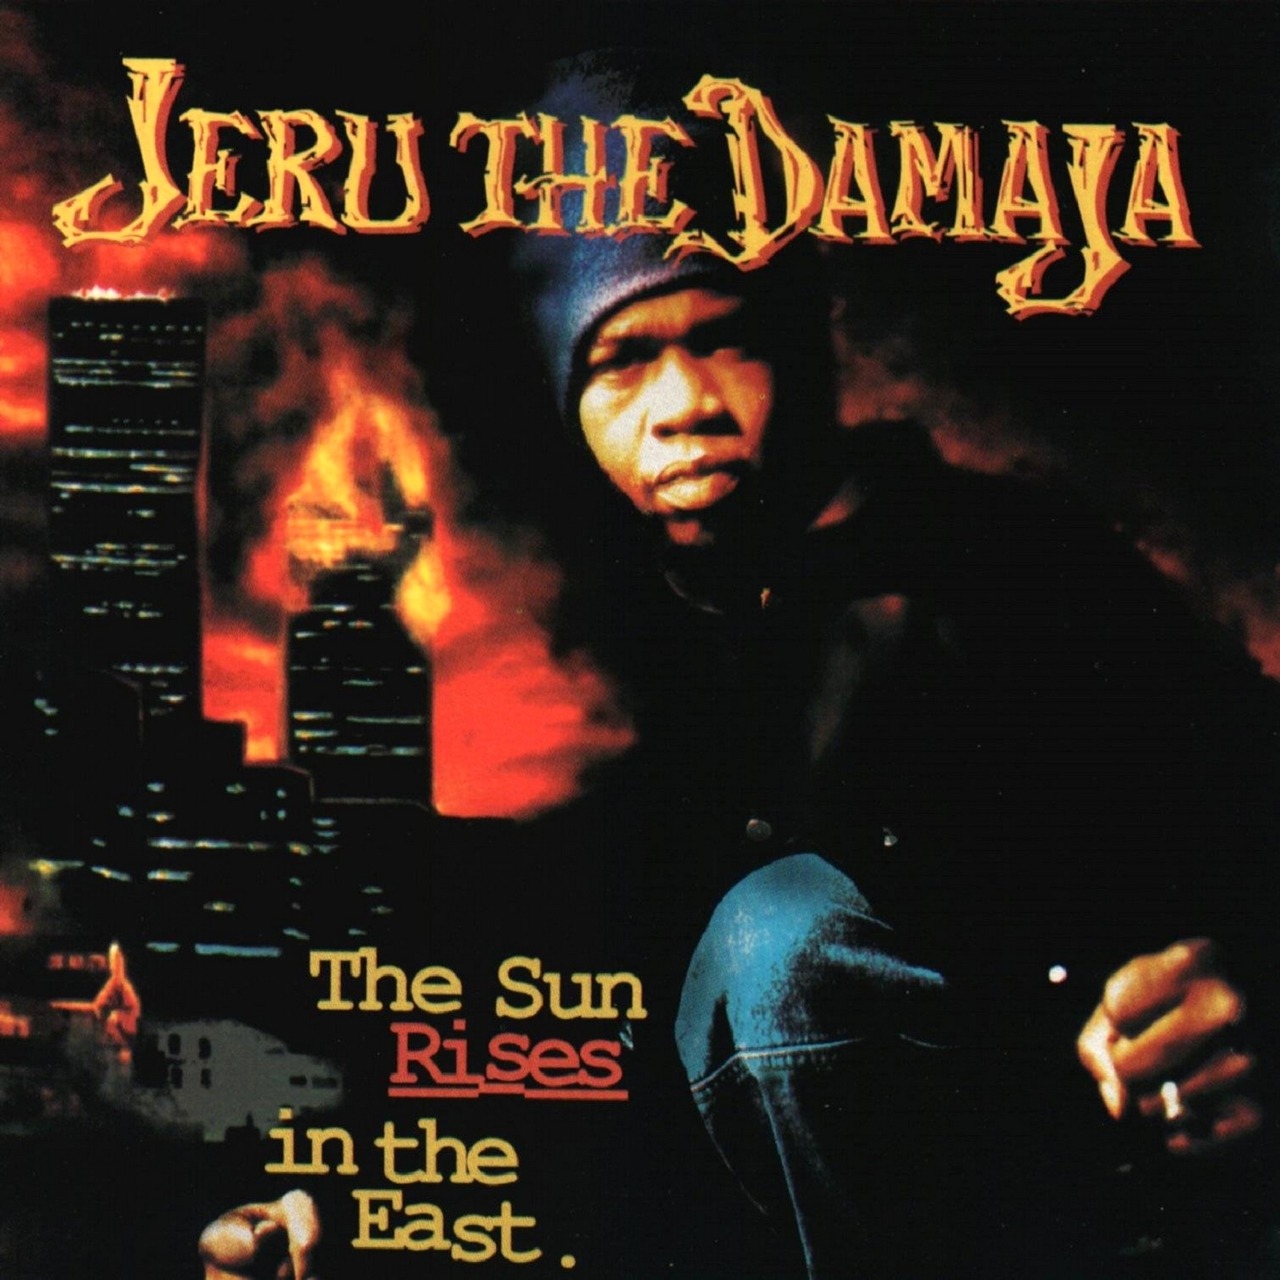 BACK IN THE DAY |5/24/94| Jeru The Damaja releases his debut album, The Sun Rises